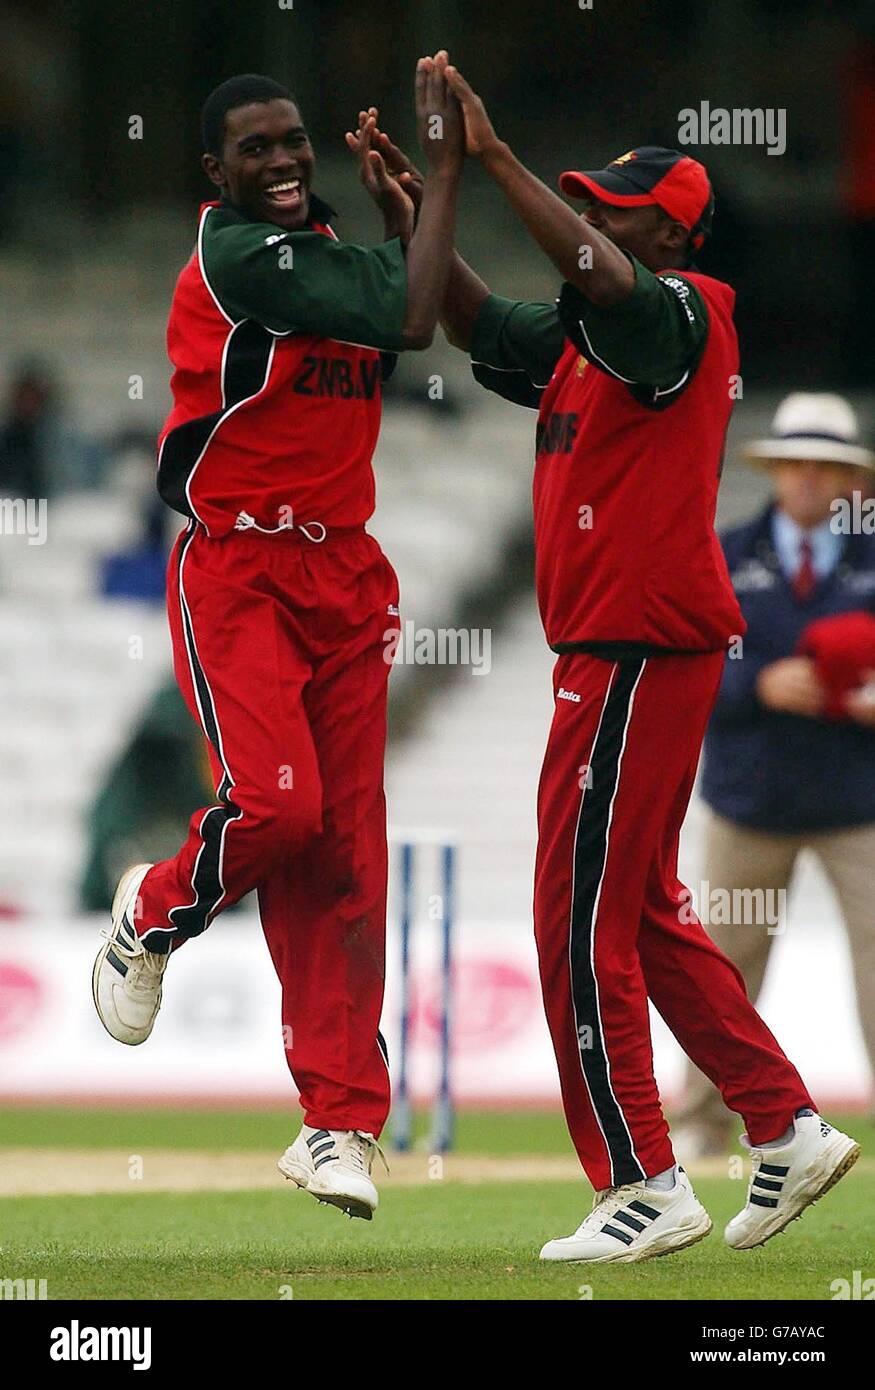 EDITORIAL USE ONLY. NO MOBILE PHONE USE. Elton Chigumbura (left) celebrates taking Marvan Atapattu's, wicket with Vusi Sibanda during the ICC Champions Trophy match between Sri Lanka and Zimbabwe, at the Oval, London. Stock Photo